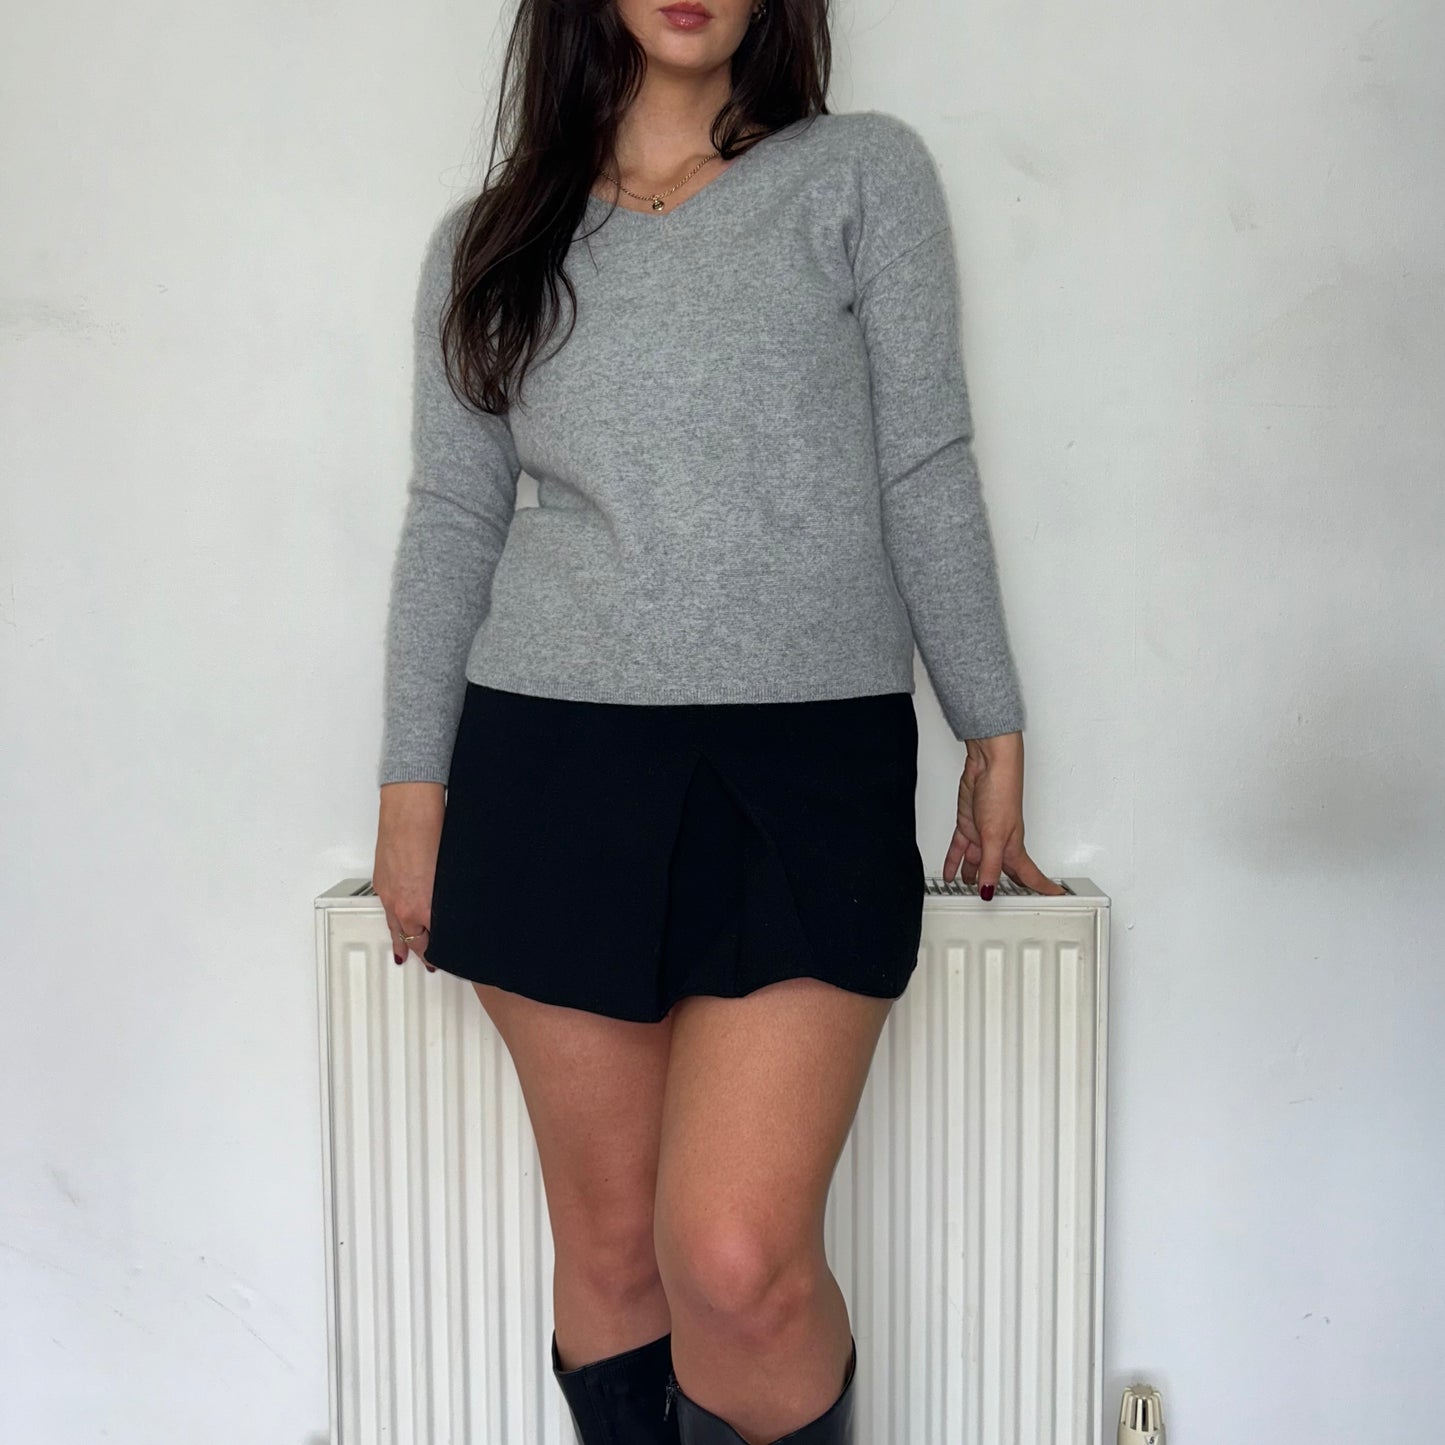 grey knit jumper shown on a model wearing a black mini skirt and black boots